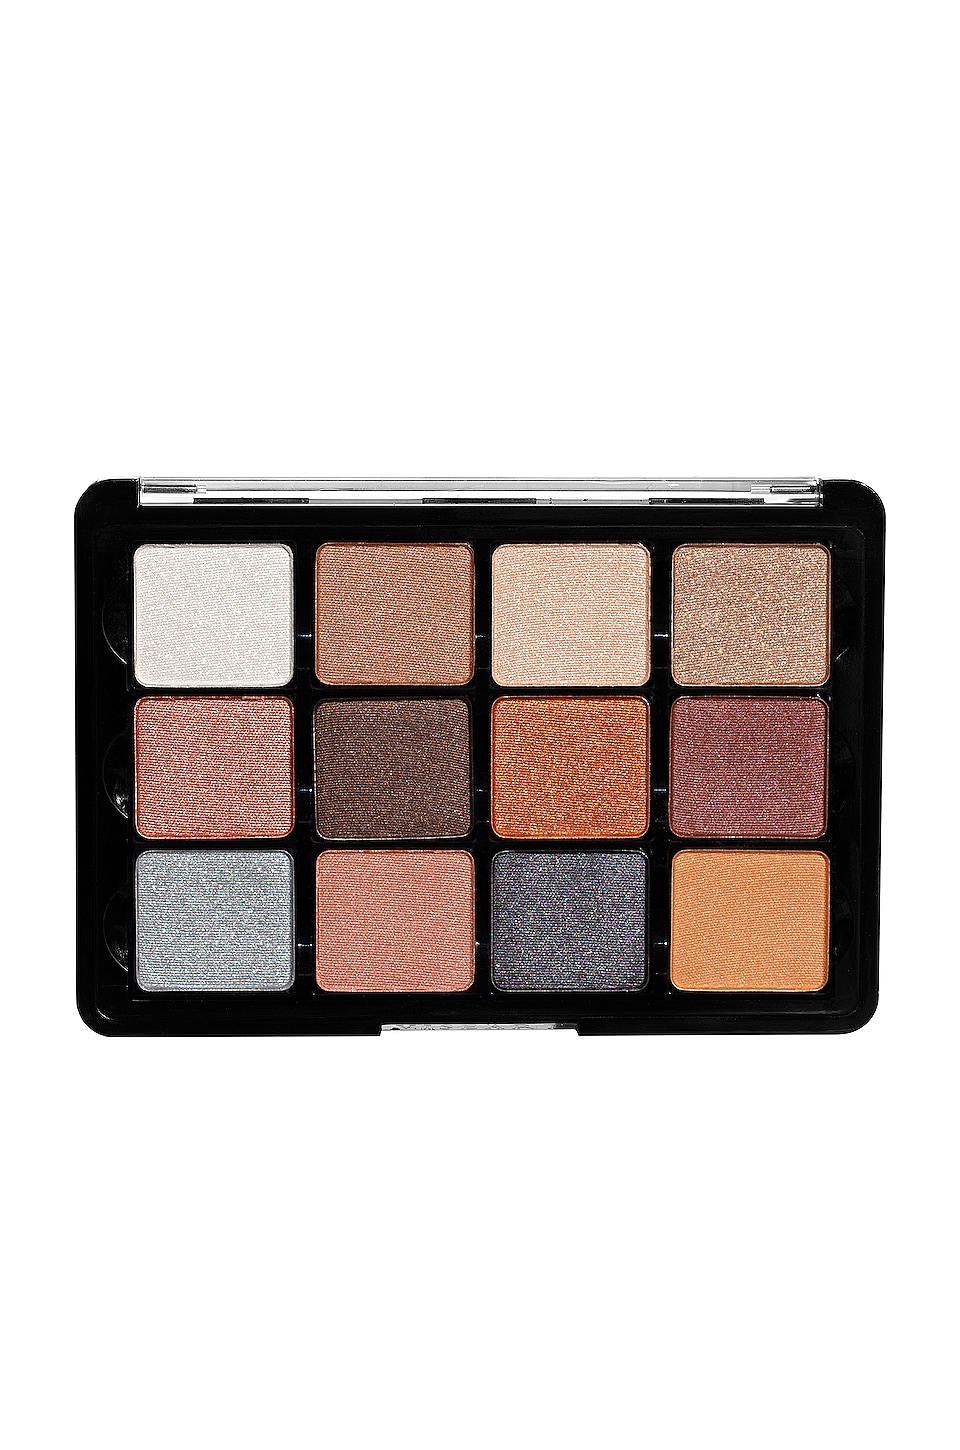 Viseart Eyeshadow Palette in Sultry Muse | REVOLVE